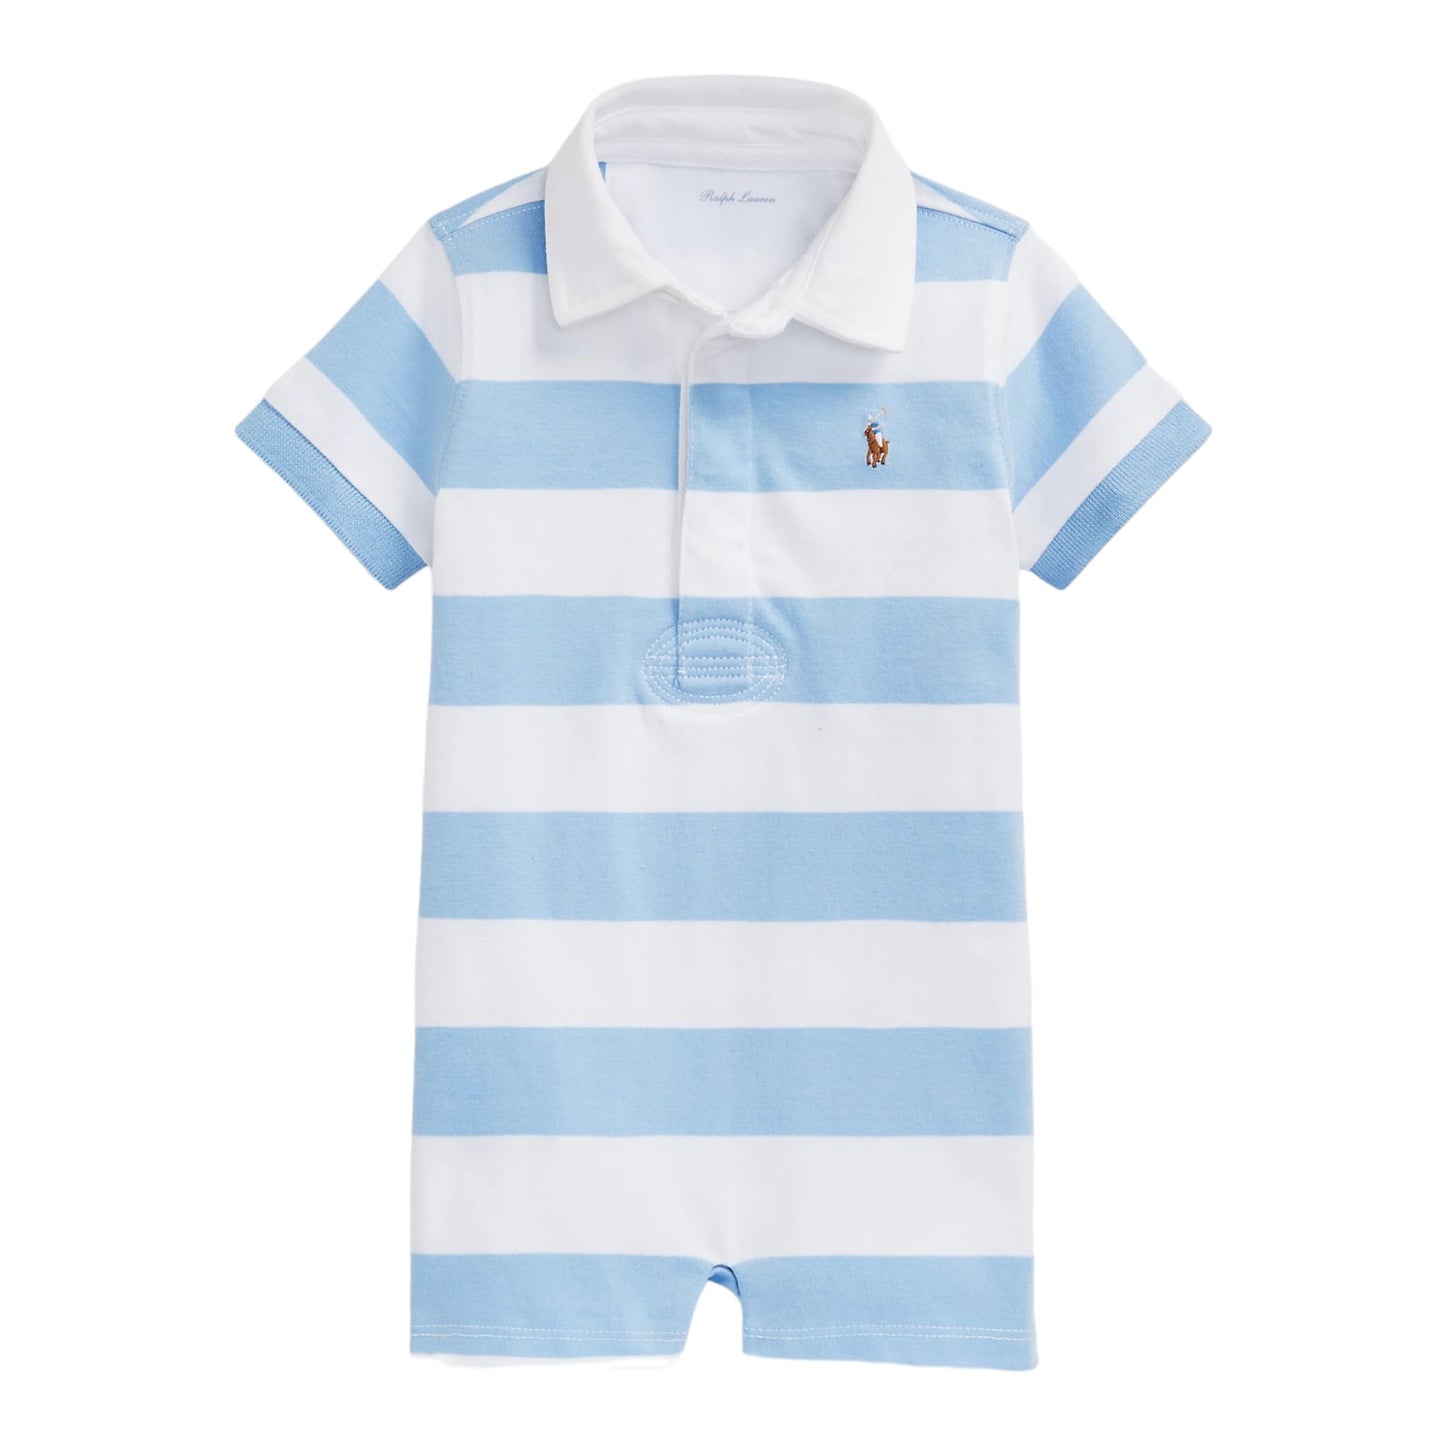 Ralph Lauren, All in ones, Ralph Lauren - Baby all in one, white and pale blue stripe, 6 months